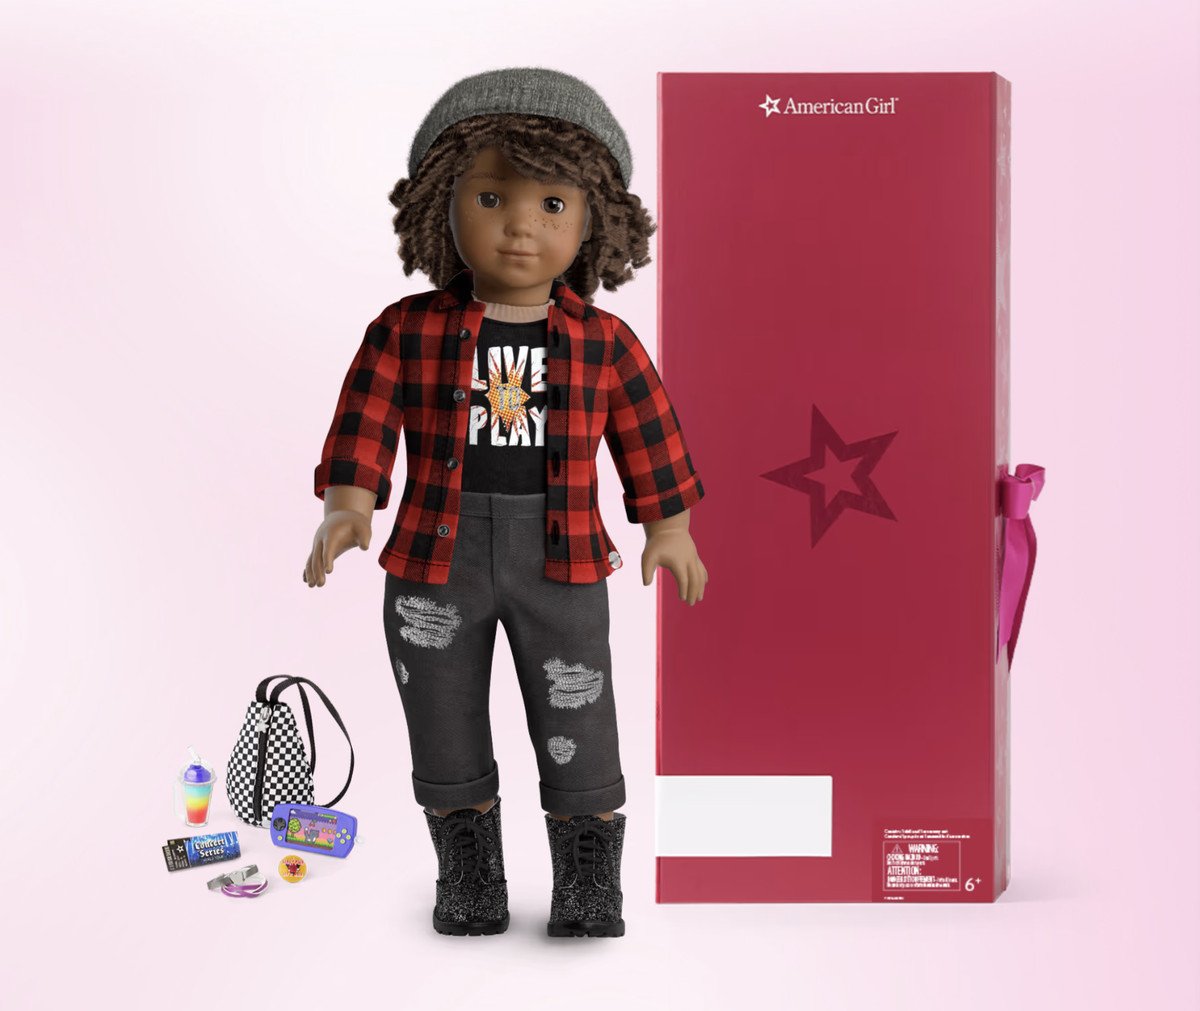 A create-your-own American Girl doll is shown wearing a flannel and ripped jeans. The doll has short, curly brown hair, brown skin, and freckles.